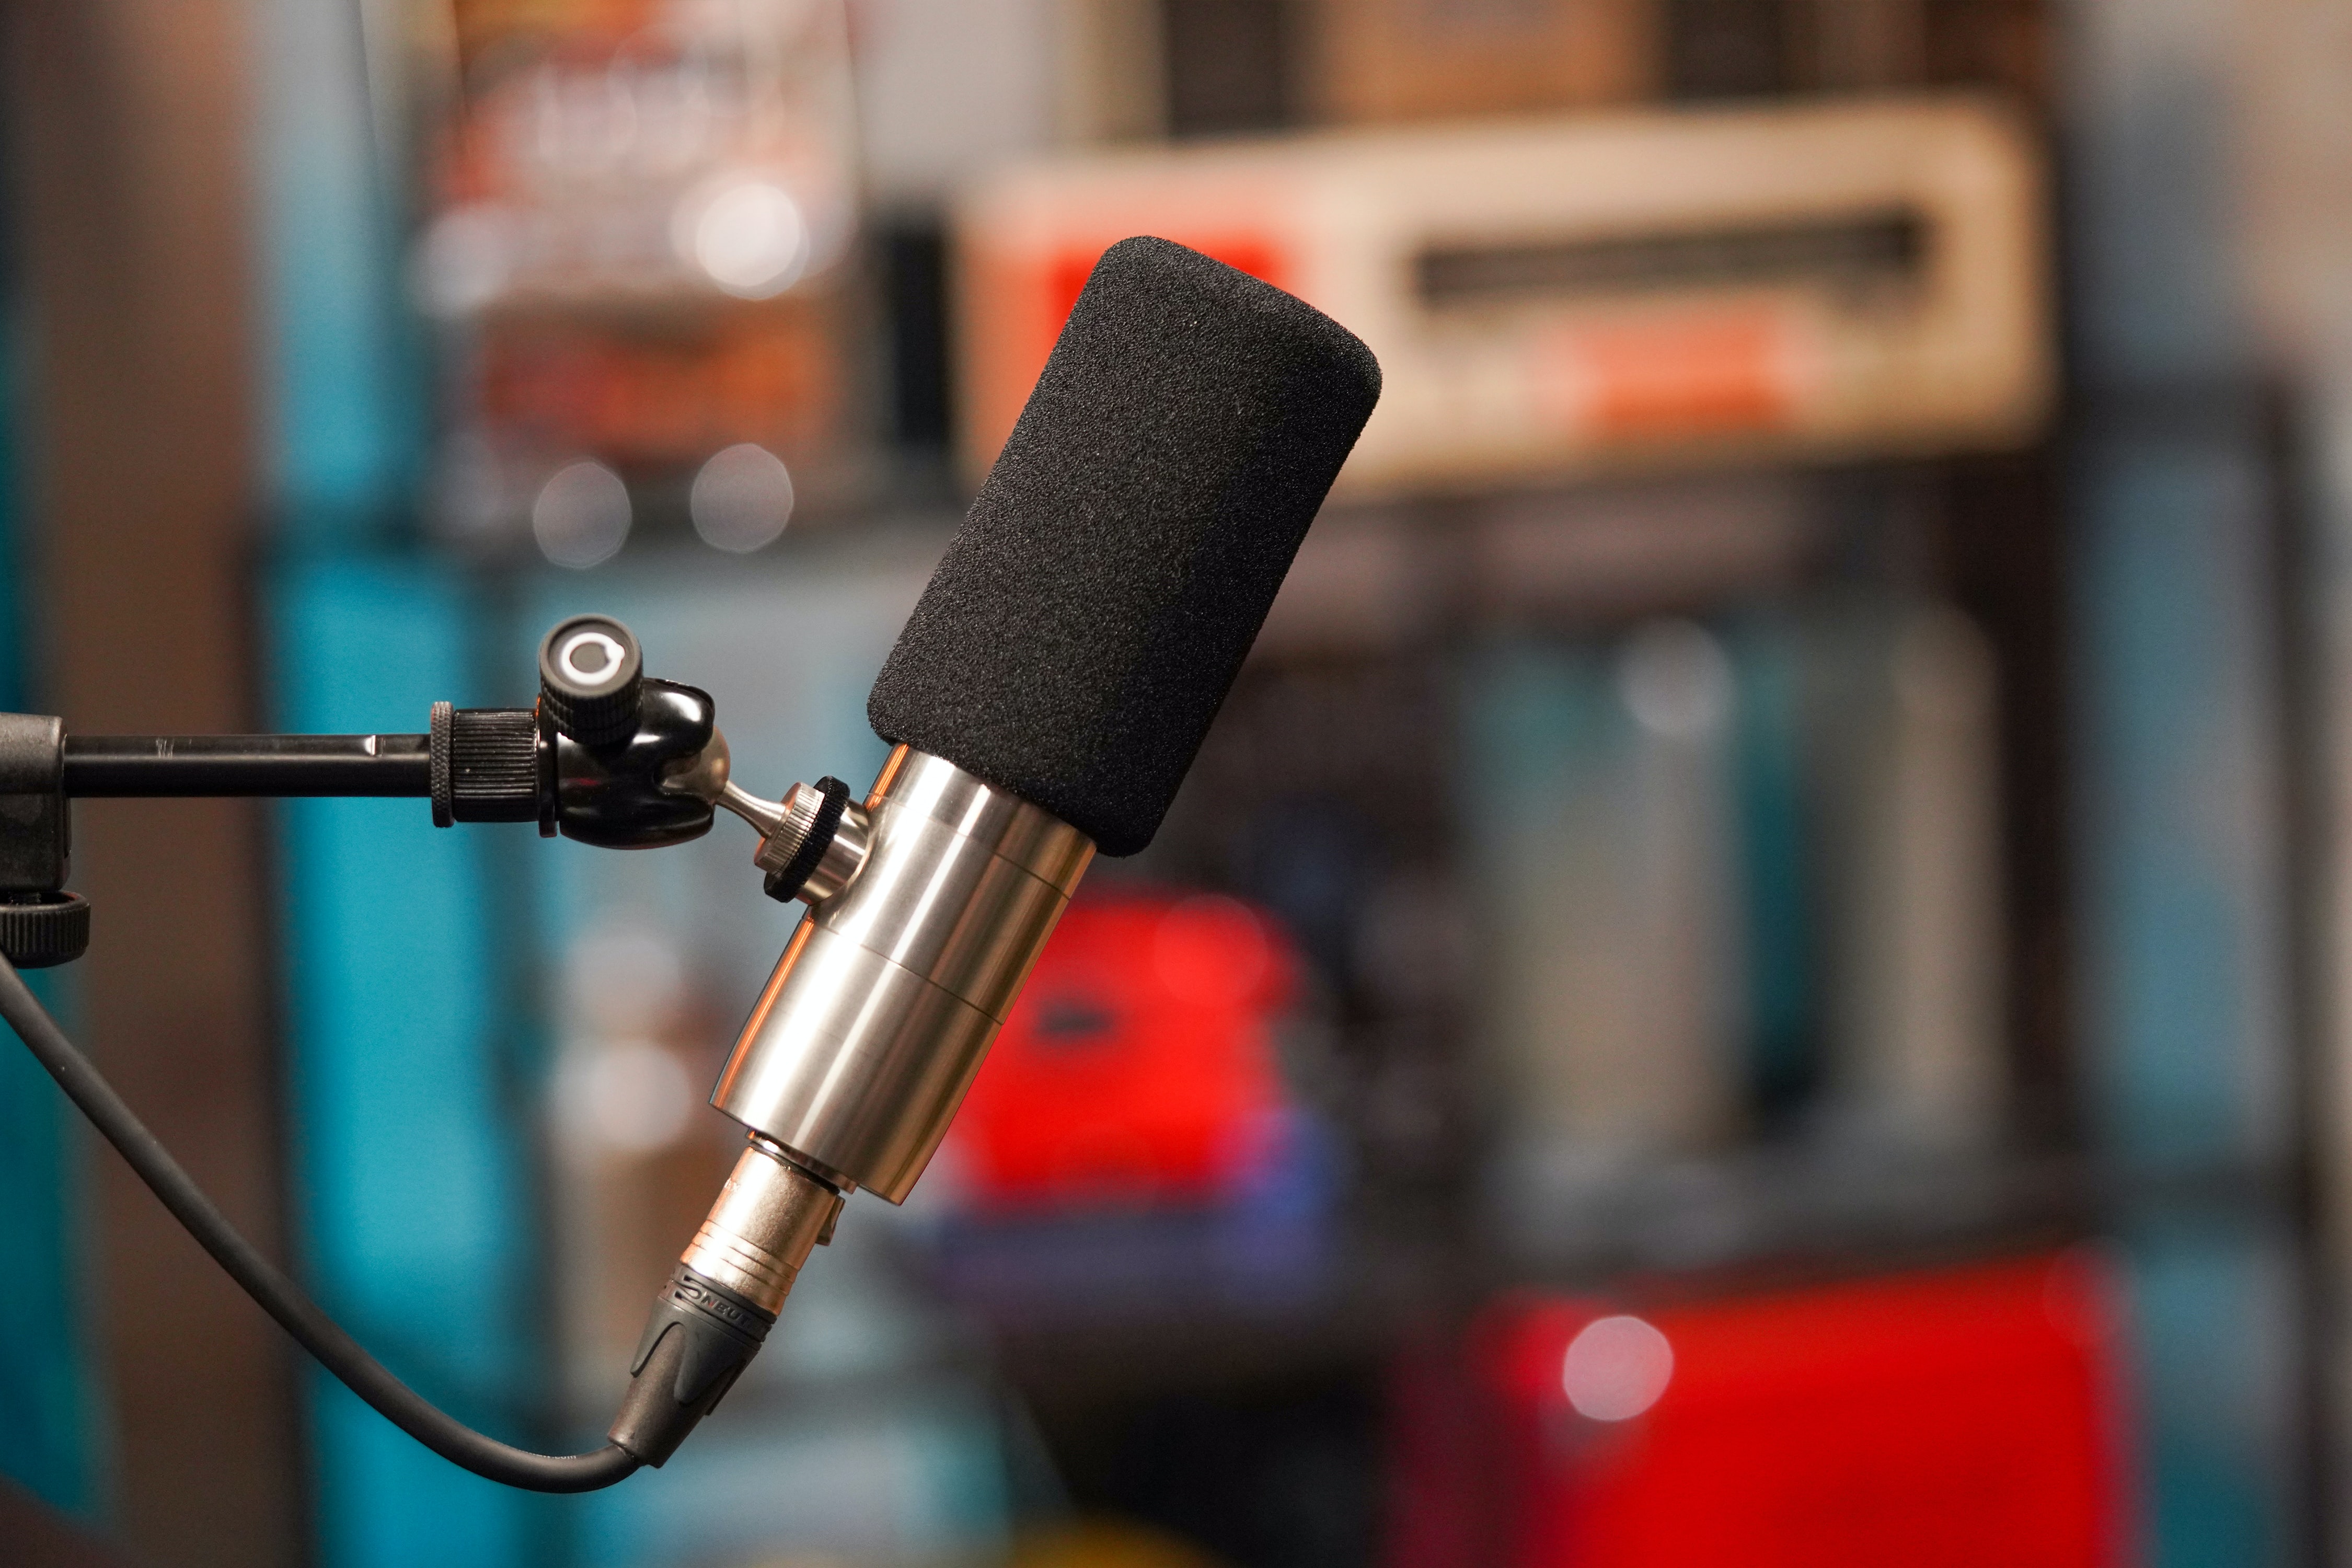 ETHOS Stainless Steel Broadcasting Microphone